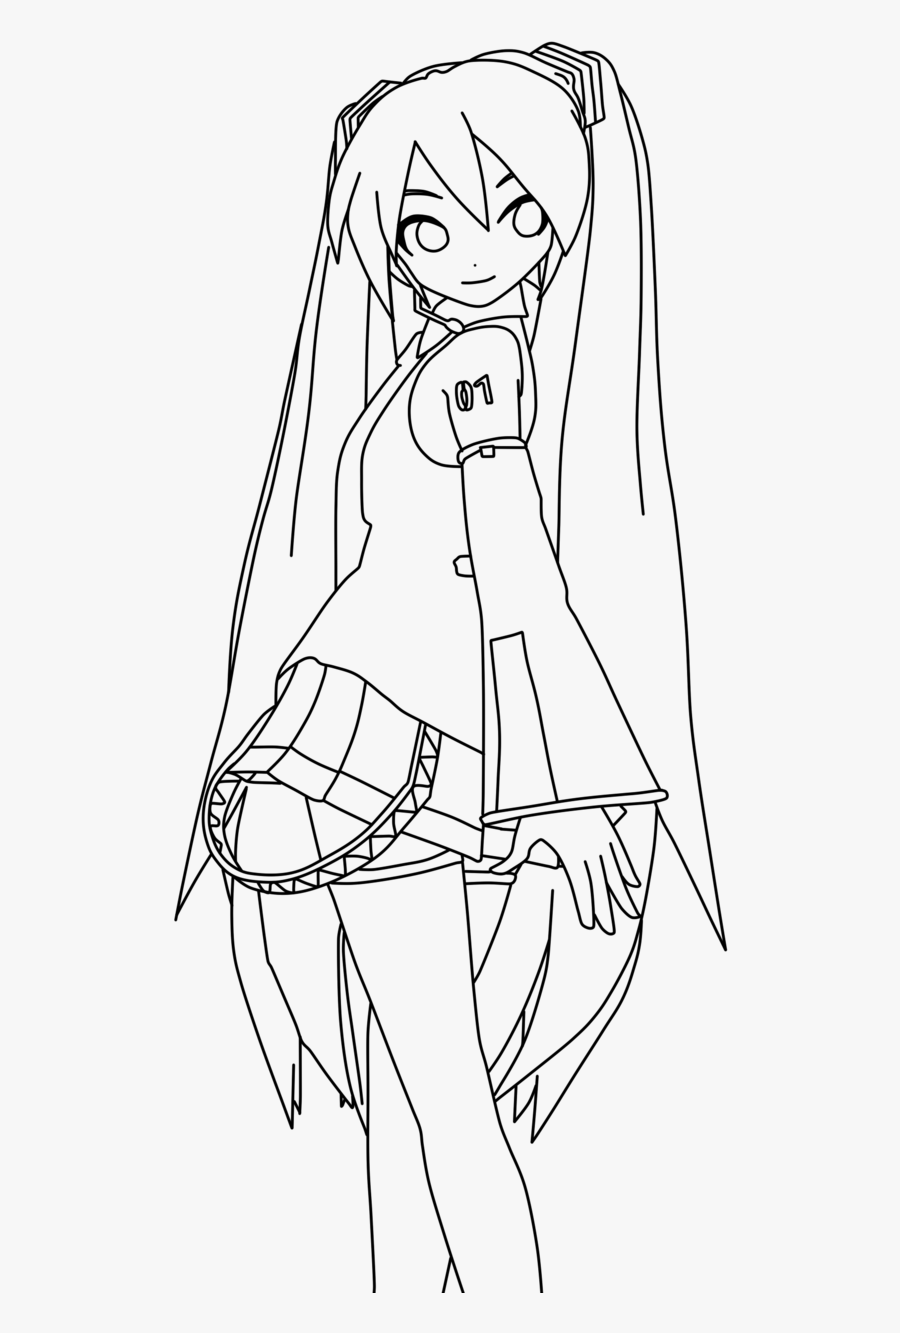 Vocaloid Coloring Pages Yandere Simulator Coloring Pages Free